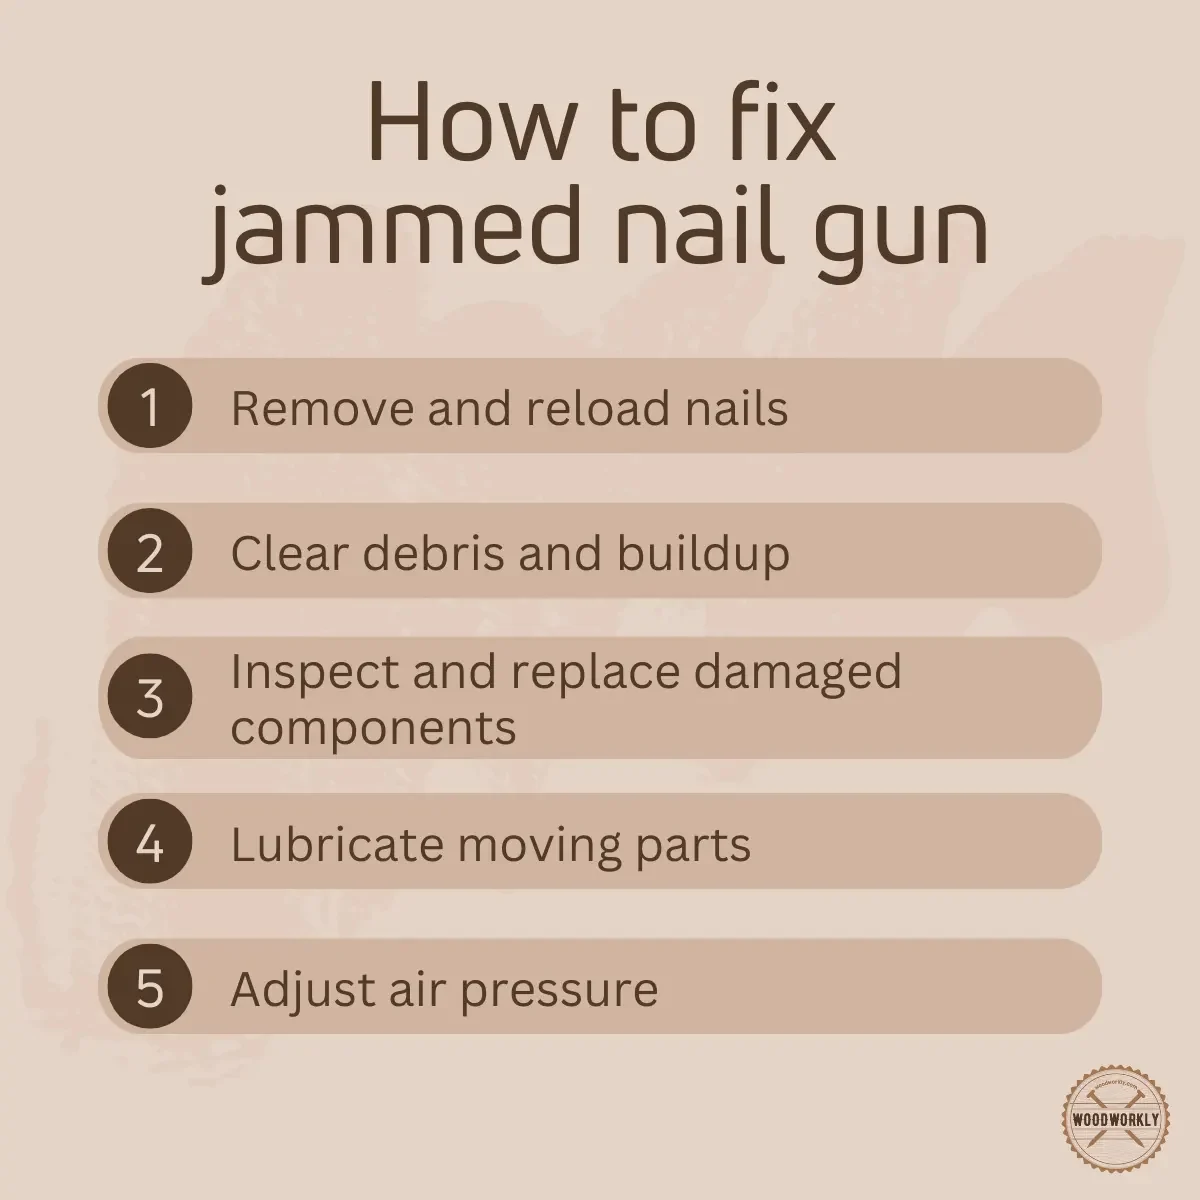 how to fix jammed nail gun